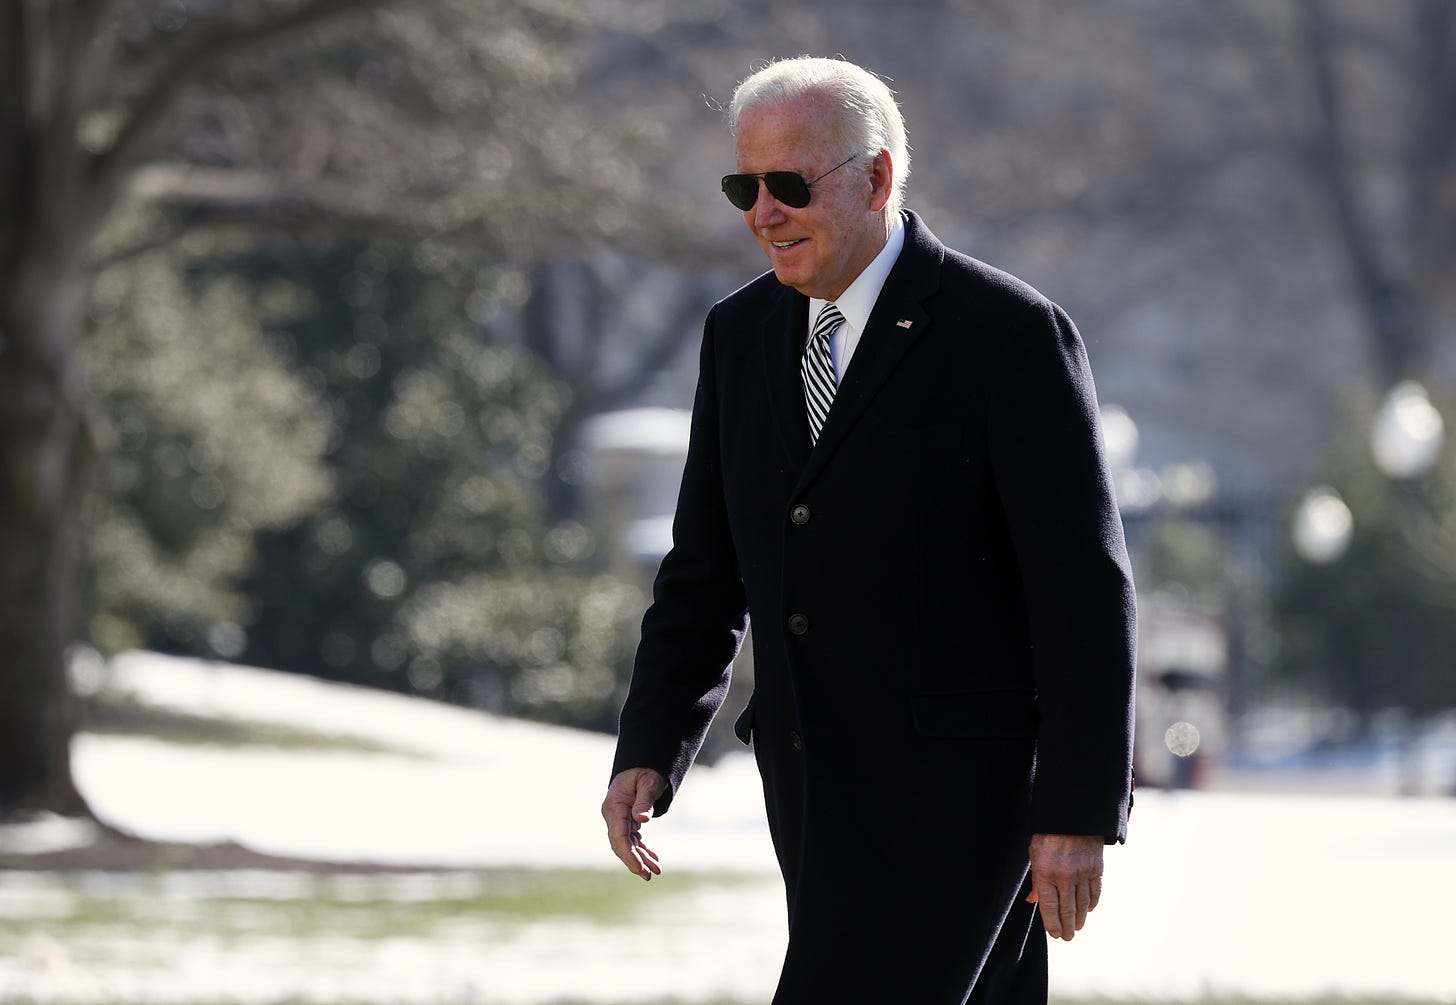 U.S. President Joe Biden at the White House, January 22, 2024. (Photo by Kevin Dietsch/Getty Images.)